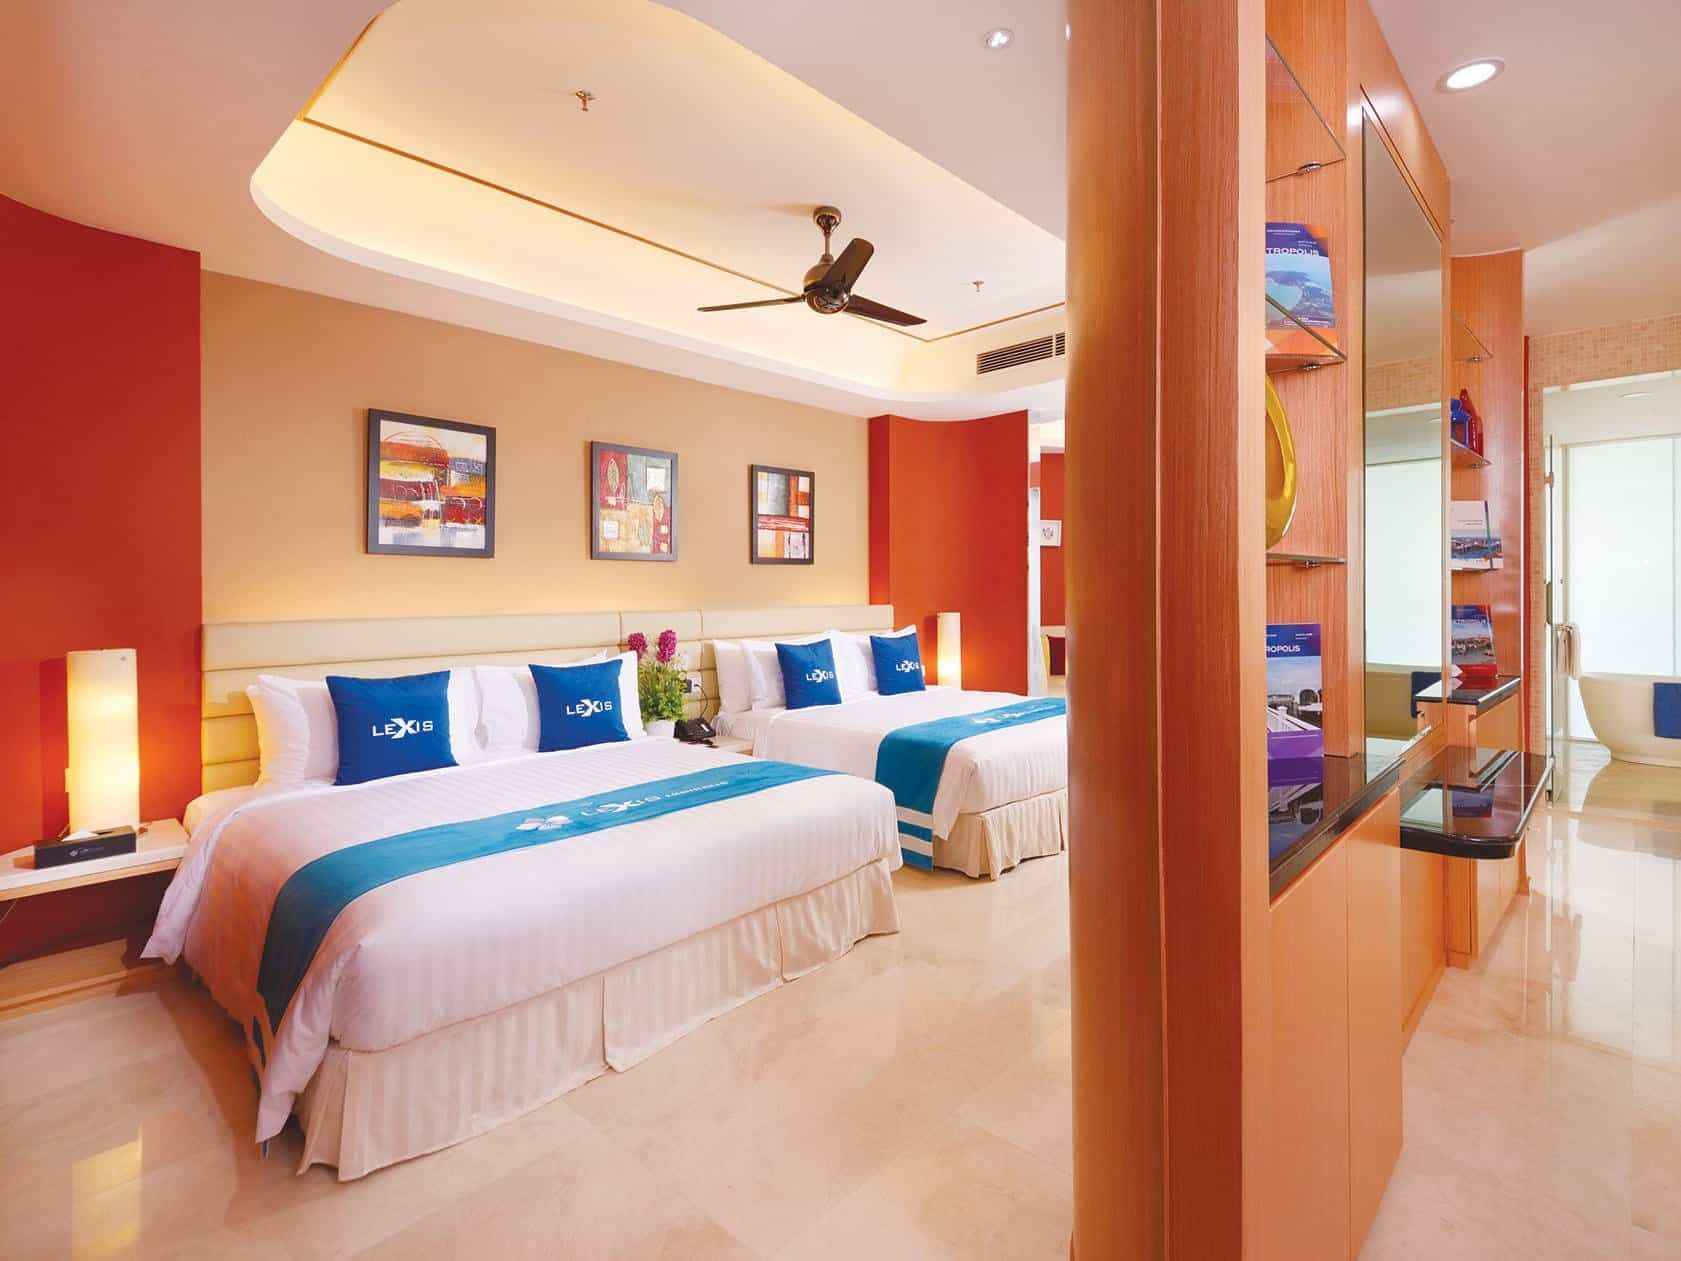 Sky Pool Villa bedroom with 2 king size beds - Lexis Hibiscus® Port Dickson